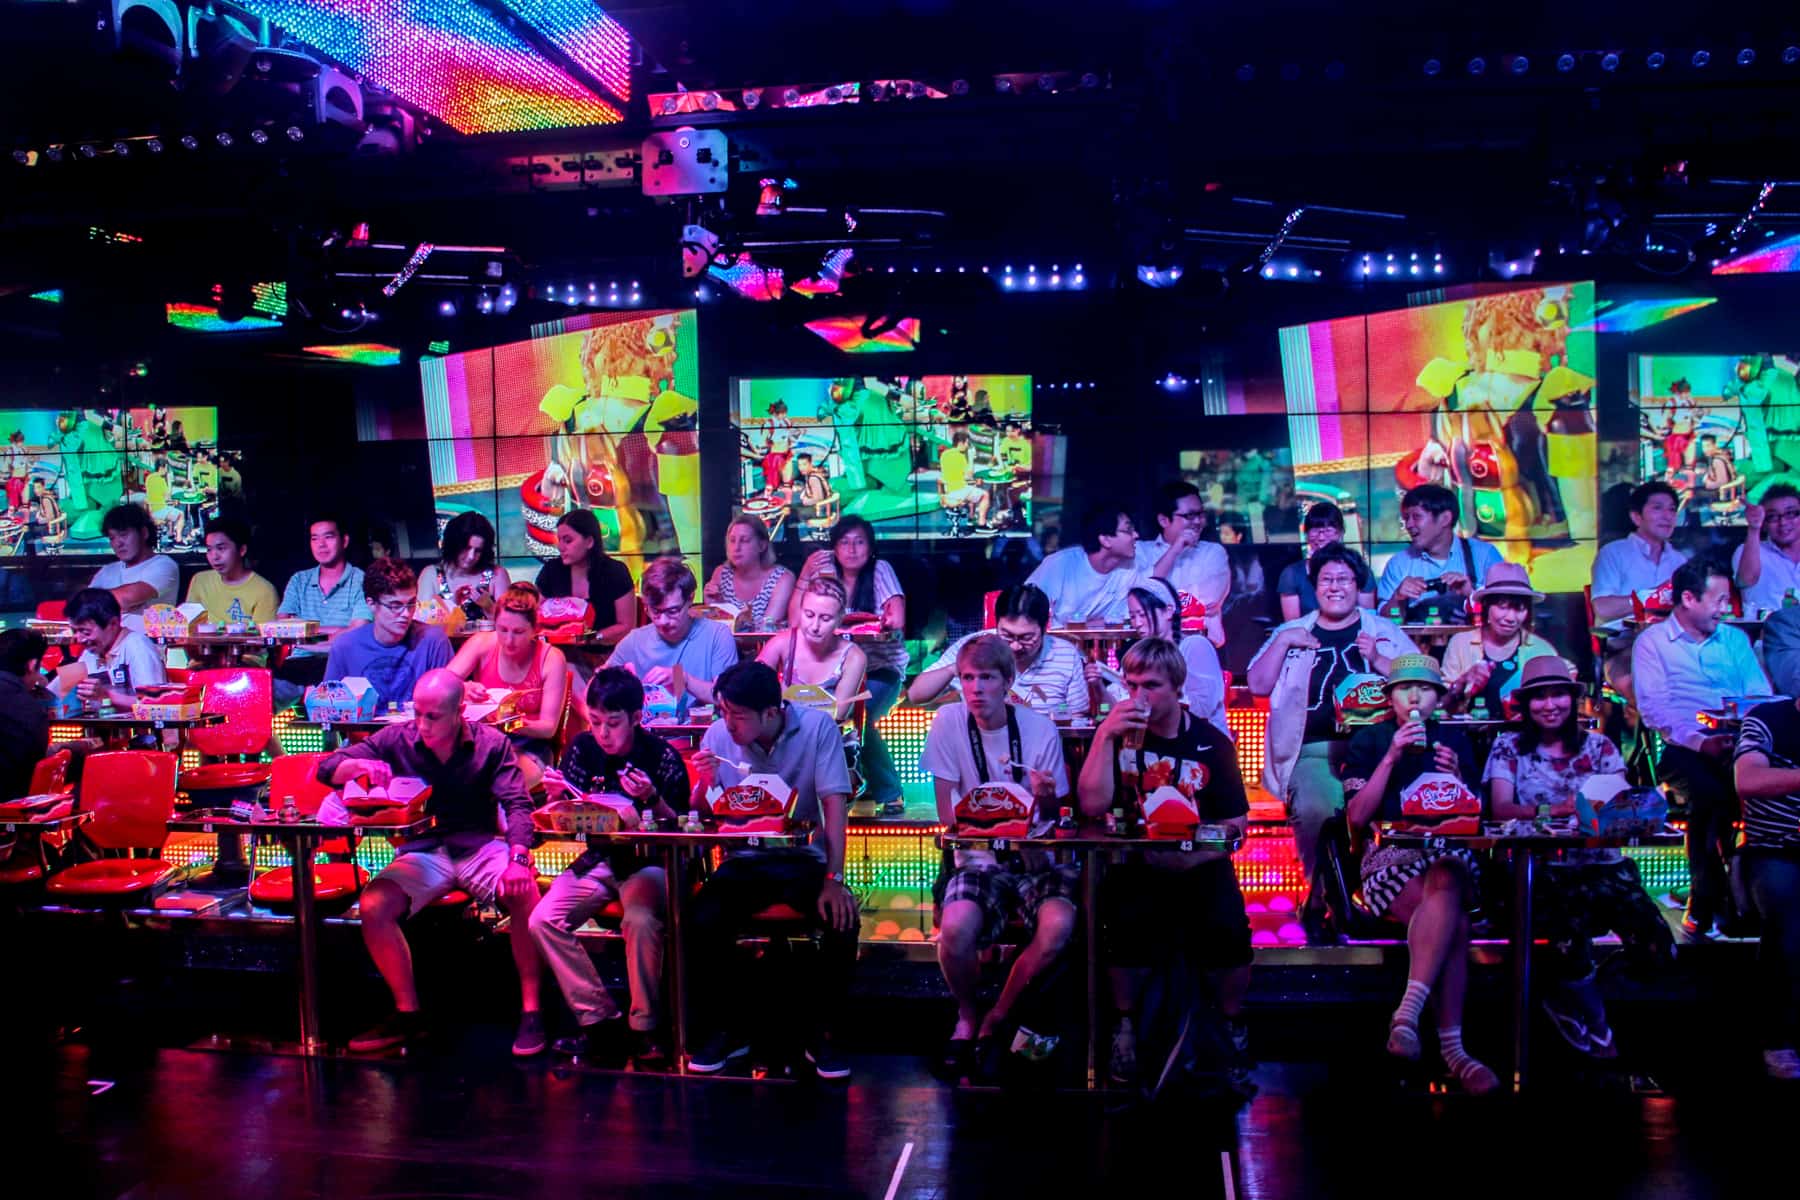 The audience at the Robot Restaurant show in Tokyo, eating from snack boxes to a backdrop of neon lights. 